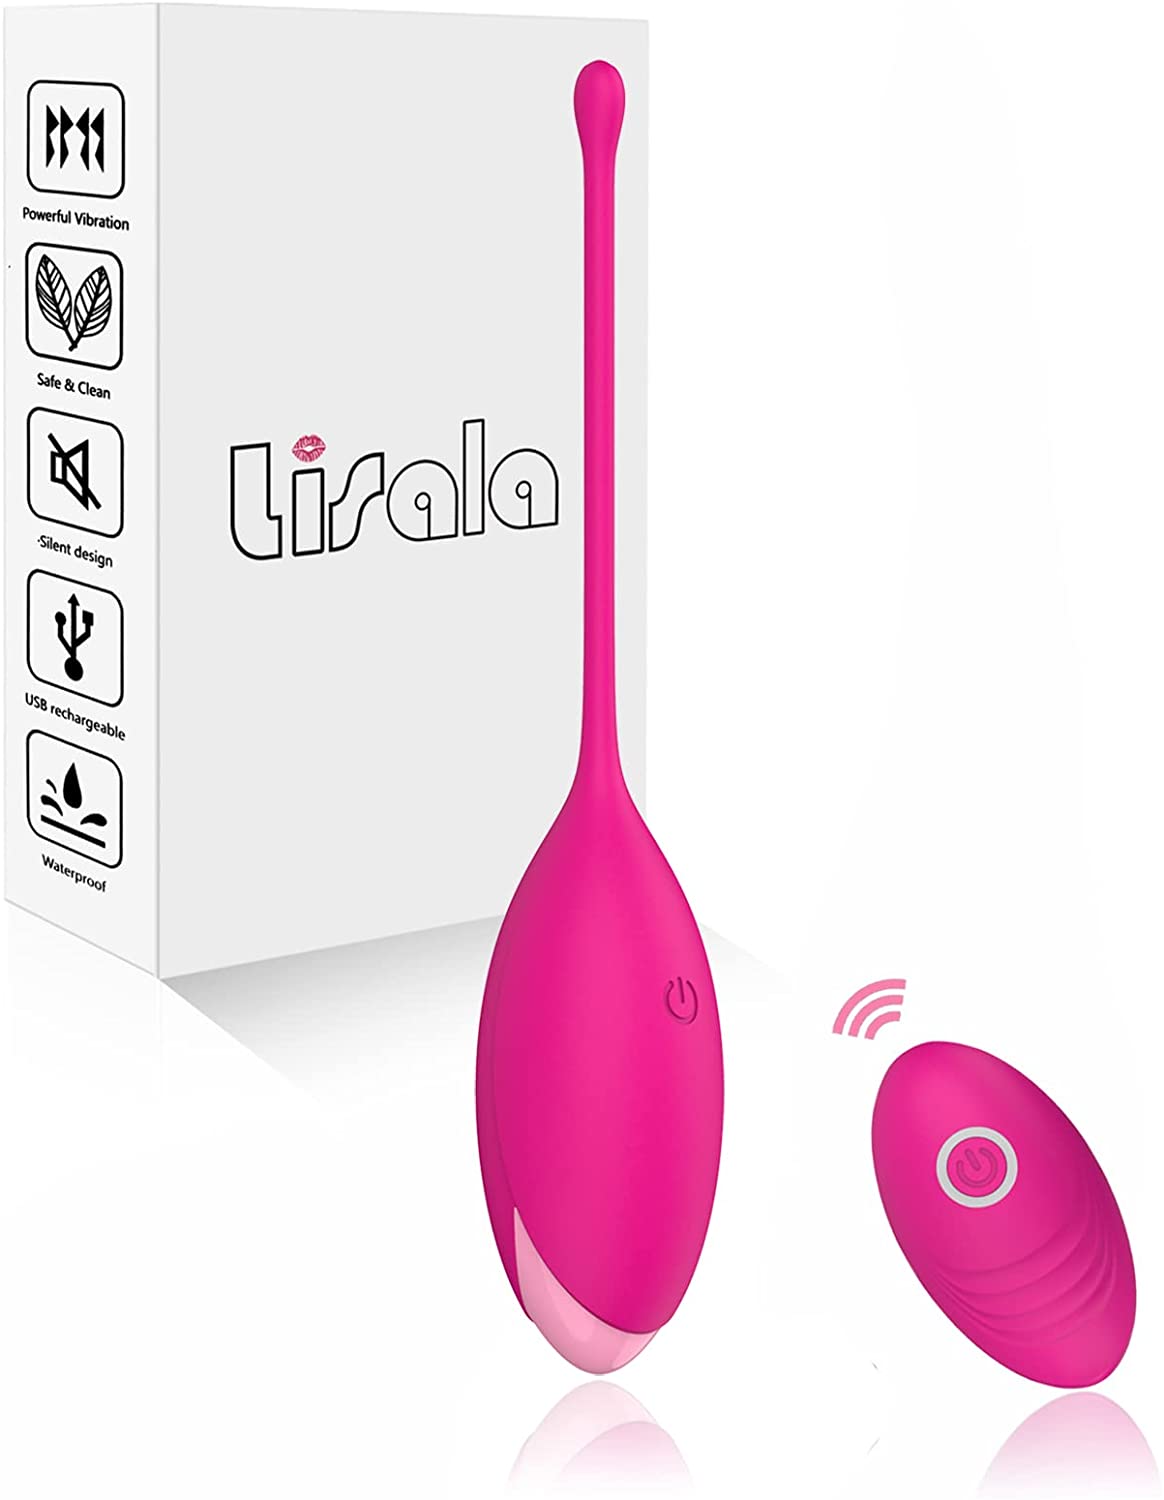 Kegel Balls for Women - Kegel Exercise Products Silicone Flexible Weight Ball